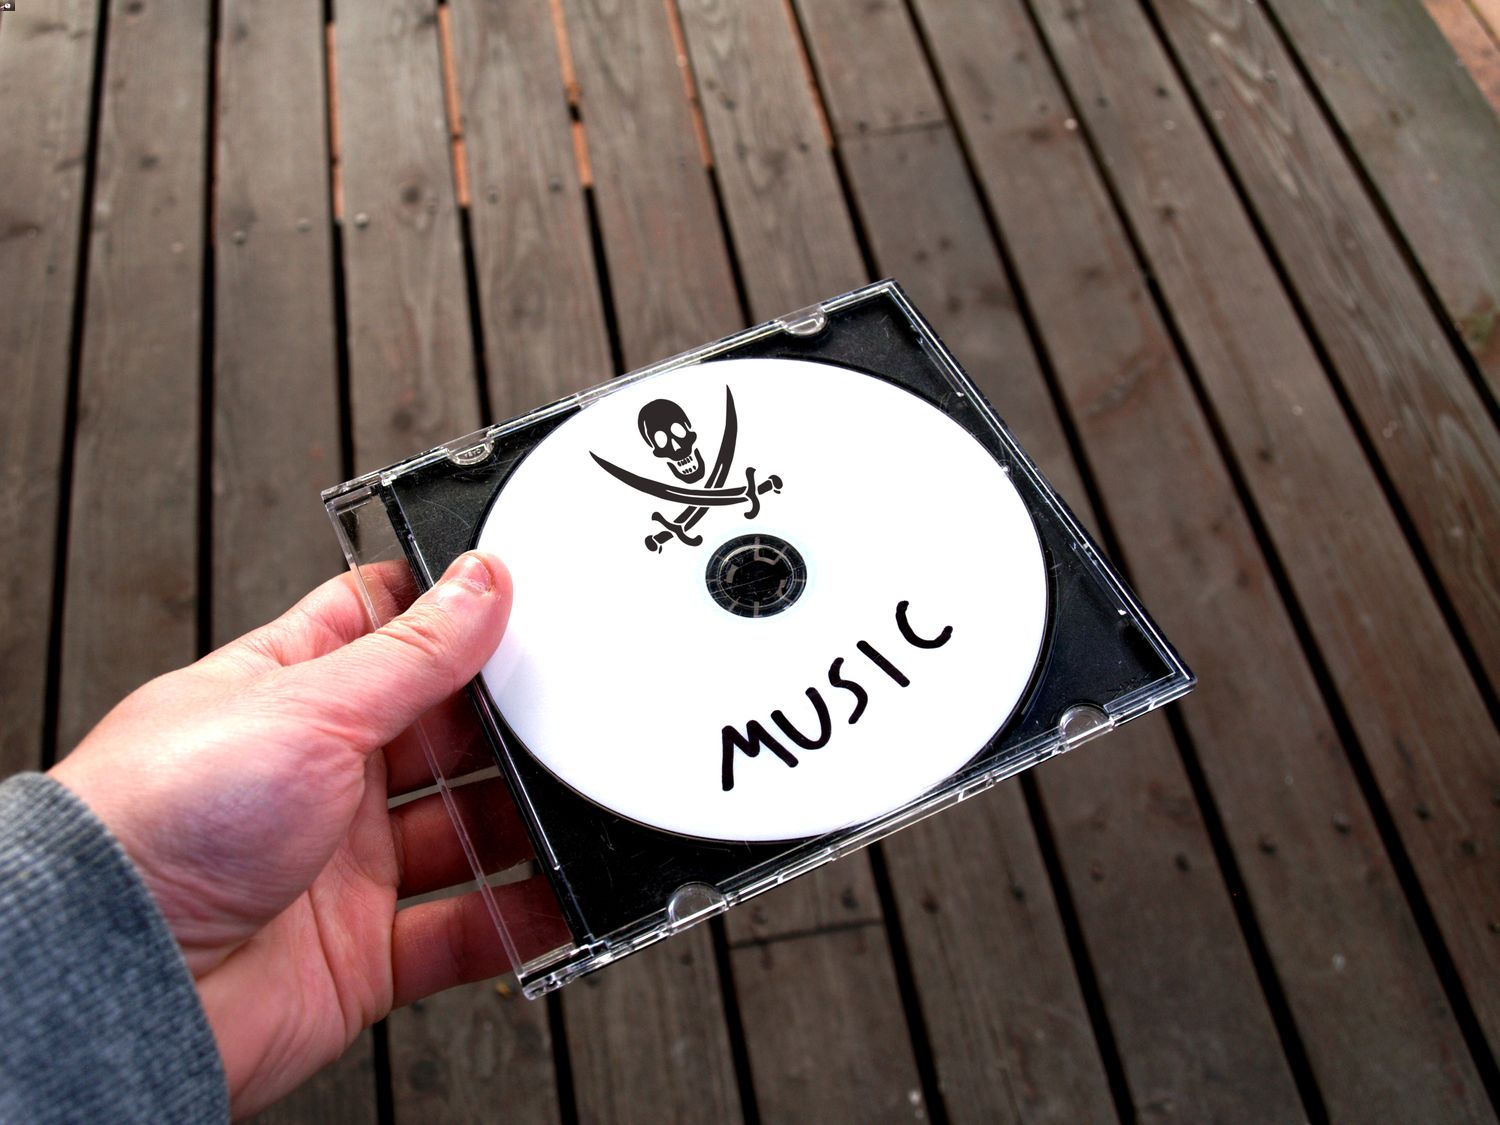 Why Do Adults Find Digital Piracy Of Music So Attractive?